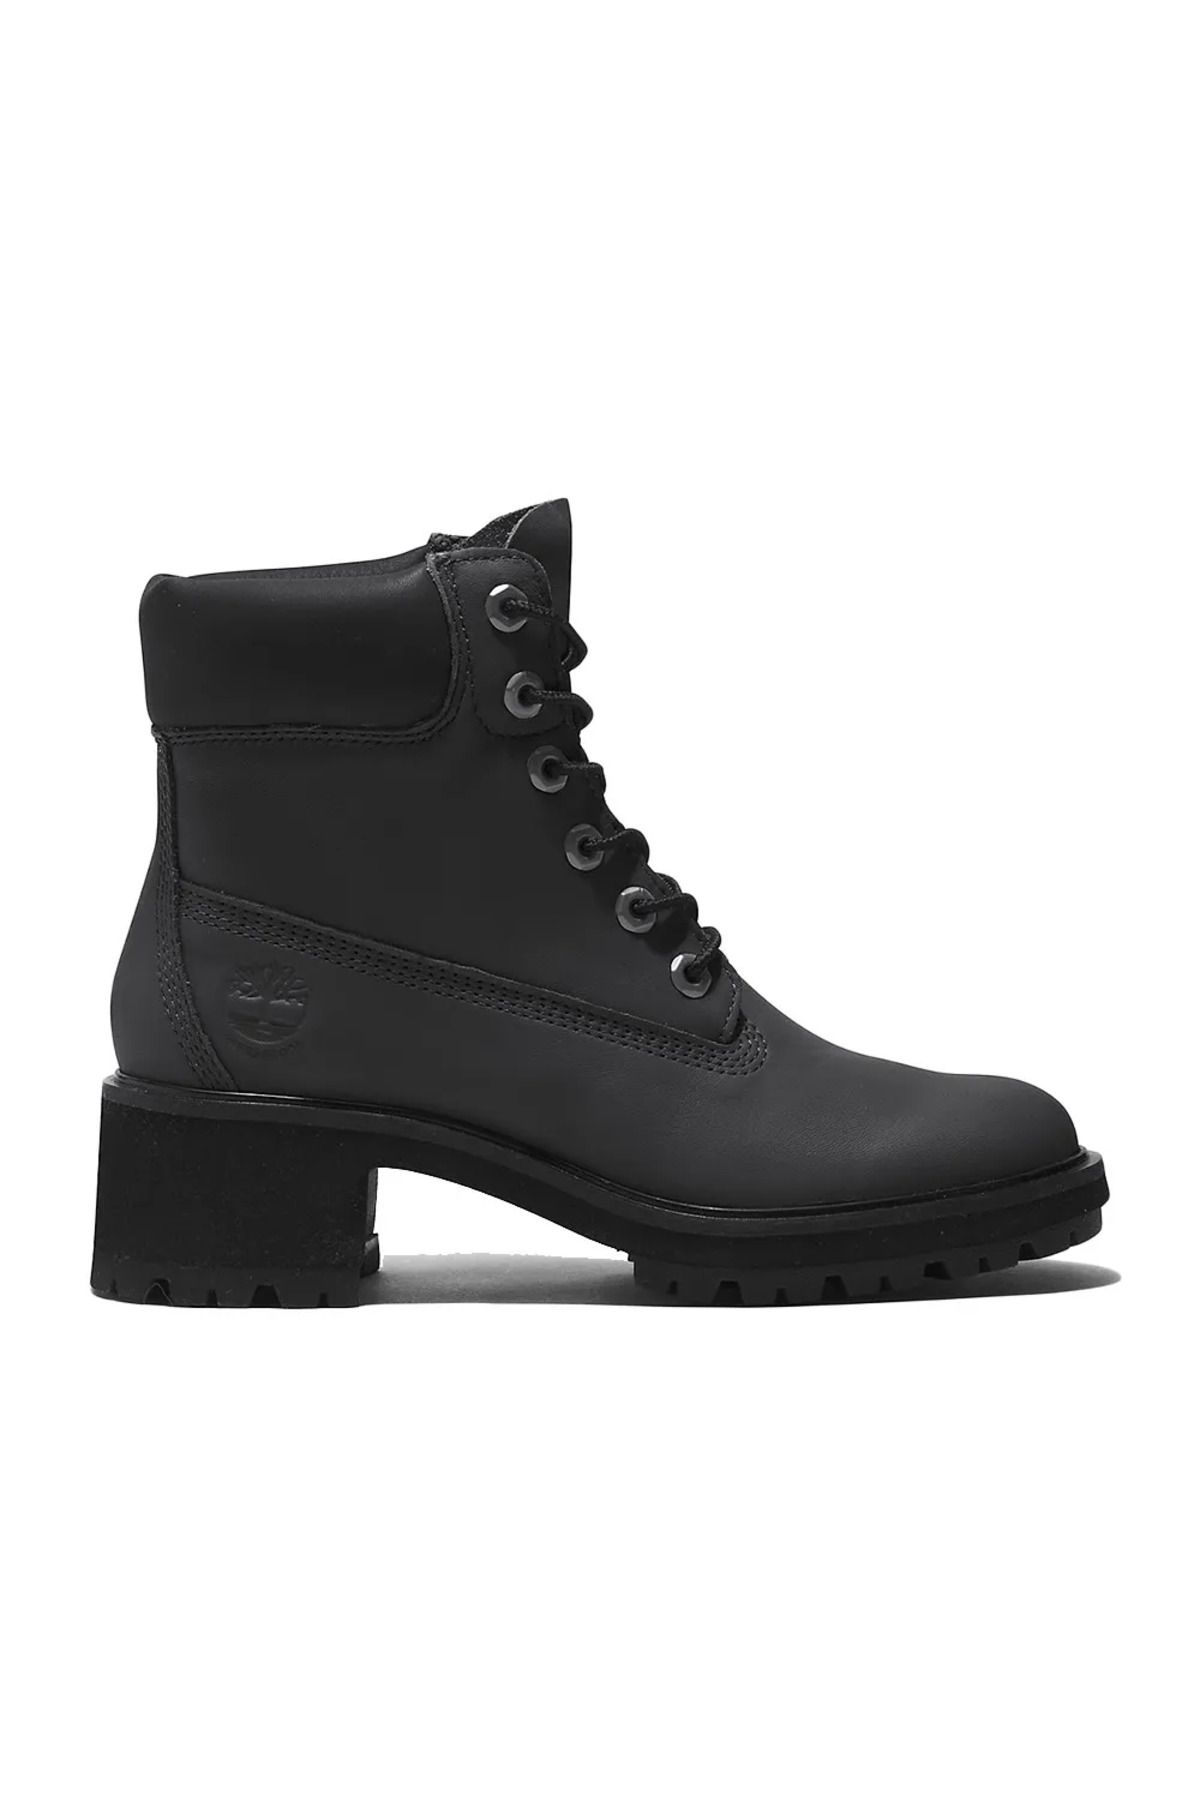 Timberland 6 INCH LACE UP WATERPROOF BOOT